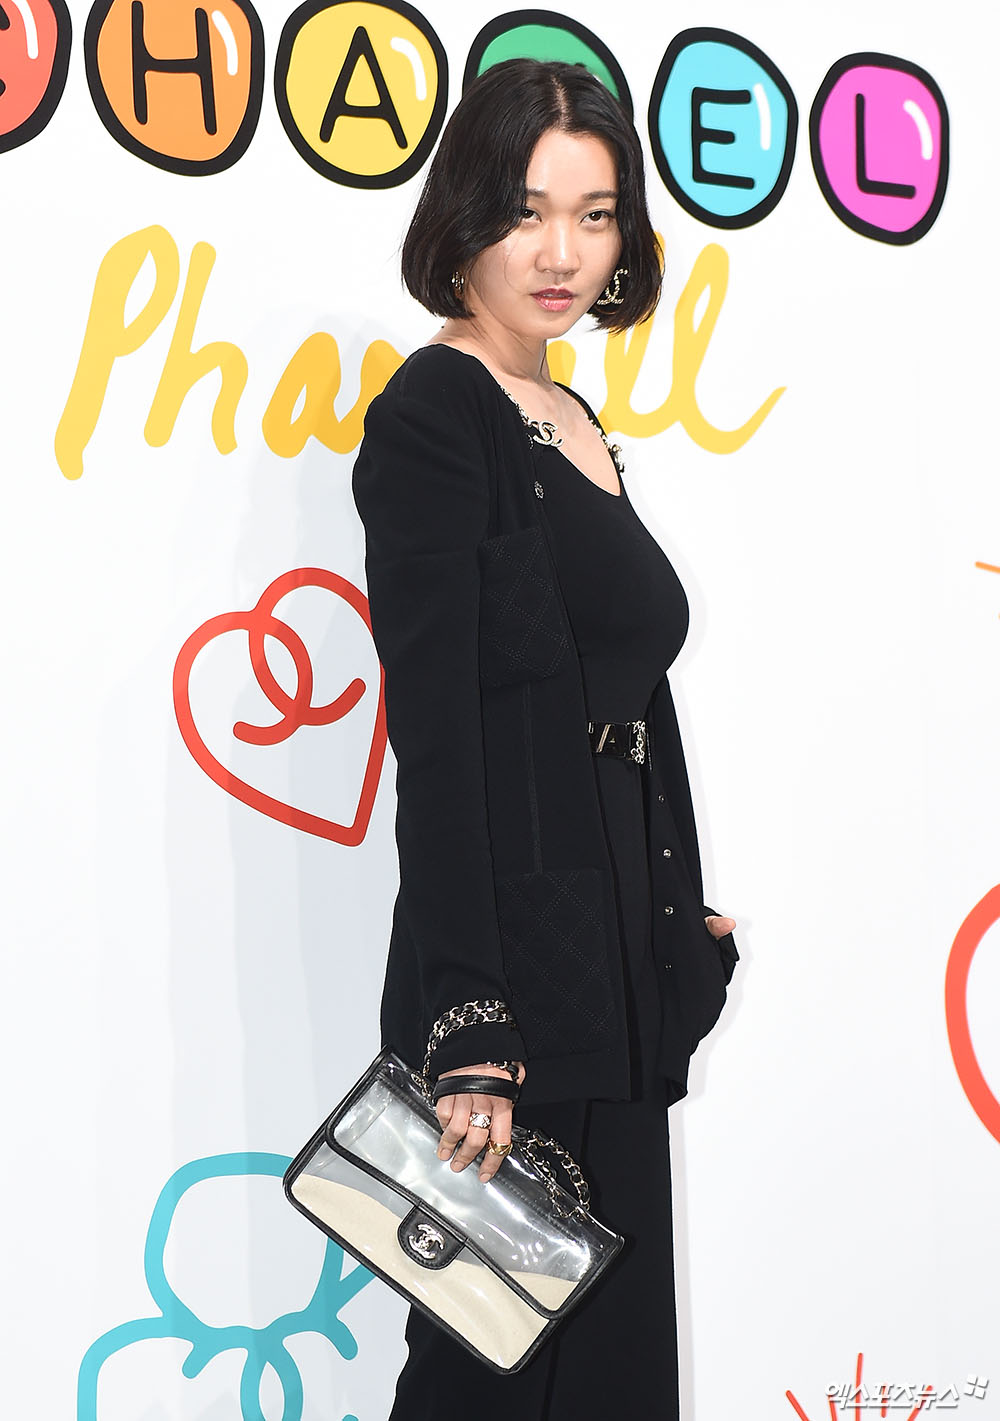 On the afternoon of the 28th, a model Jang Yoon-ju, who attended the opening of a fashion brand in Seoul Flagship and the opening of a new collection, held at Daelim Warehouse in Seongsu-dong, Seoul, poses.